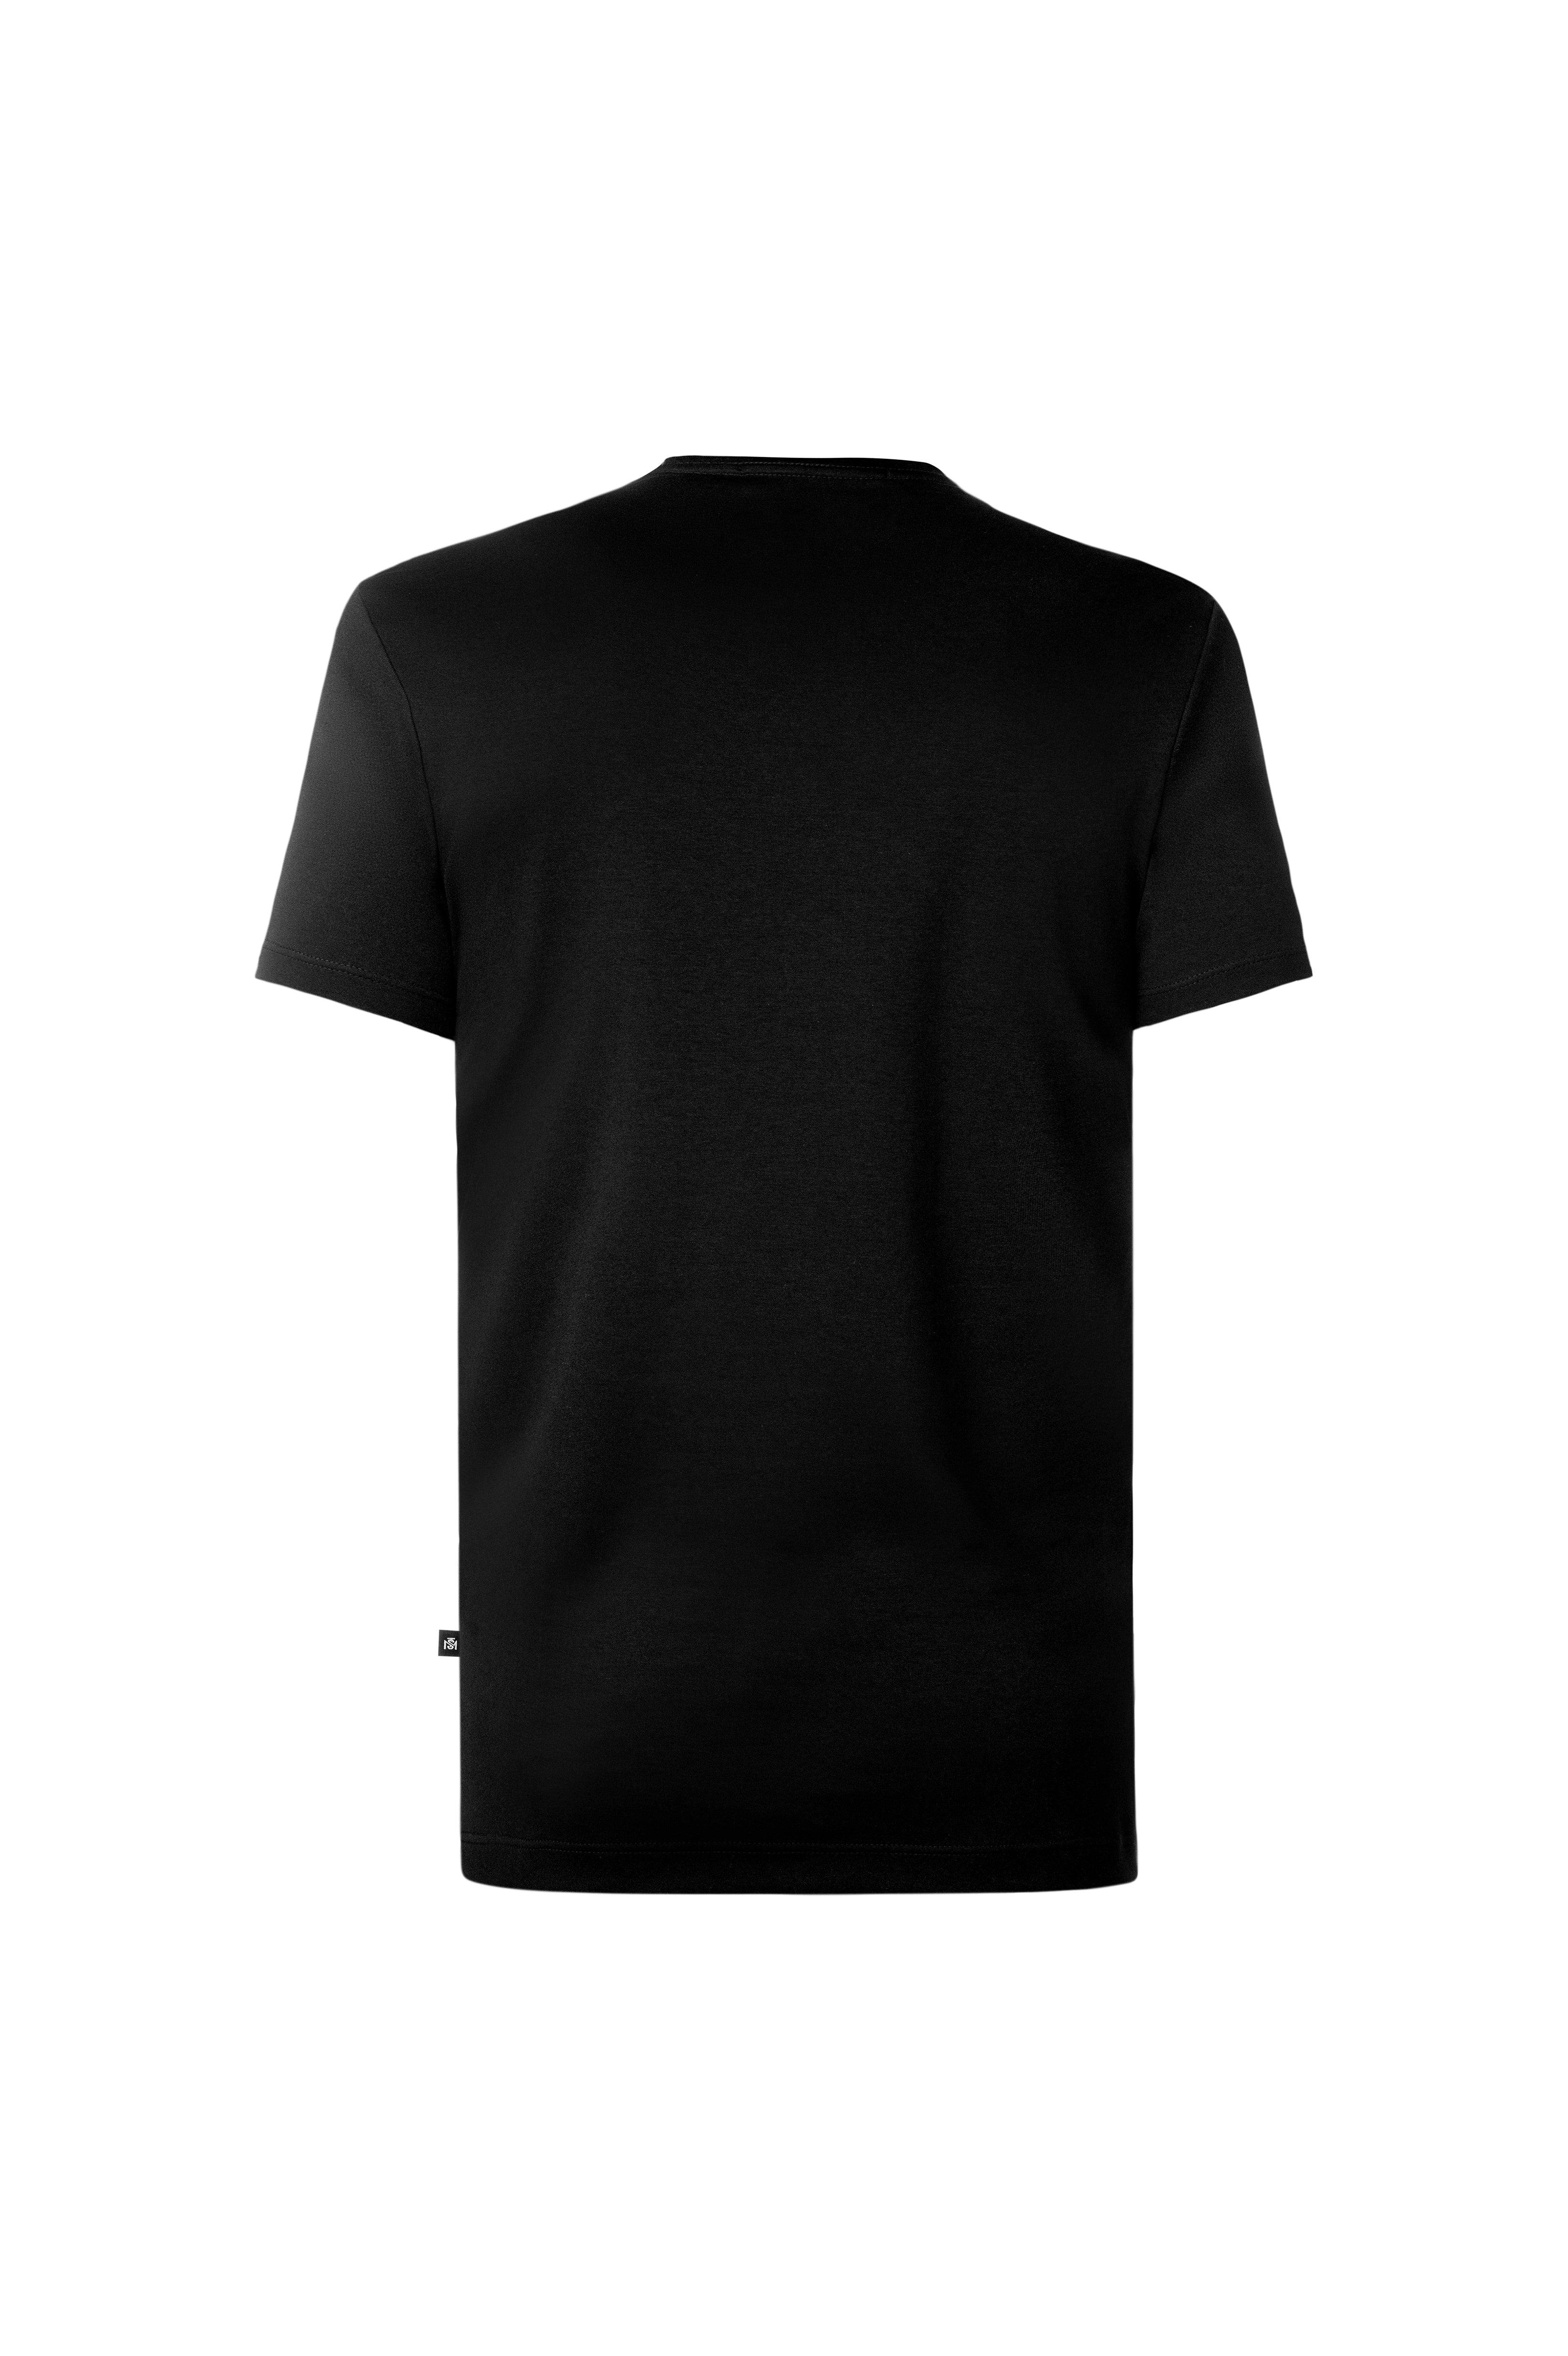 CHICAGO T-SHIRT BLACK | Monastery Couture